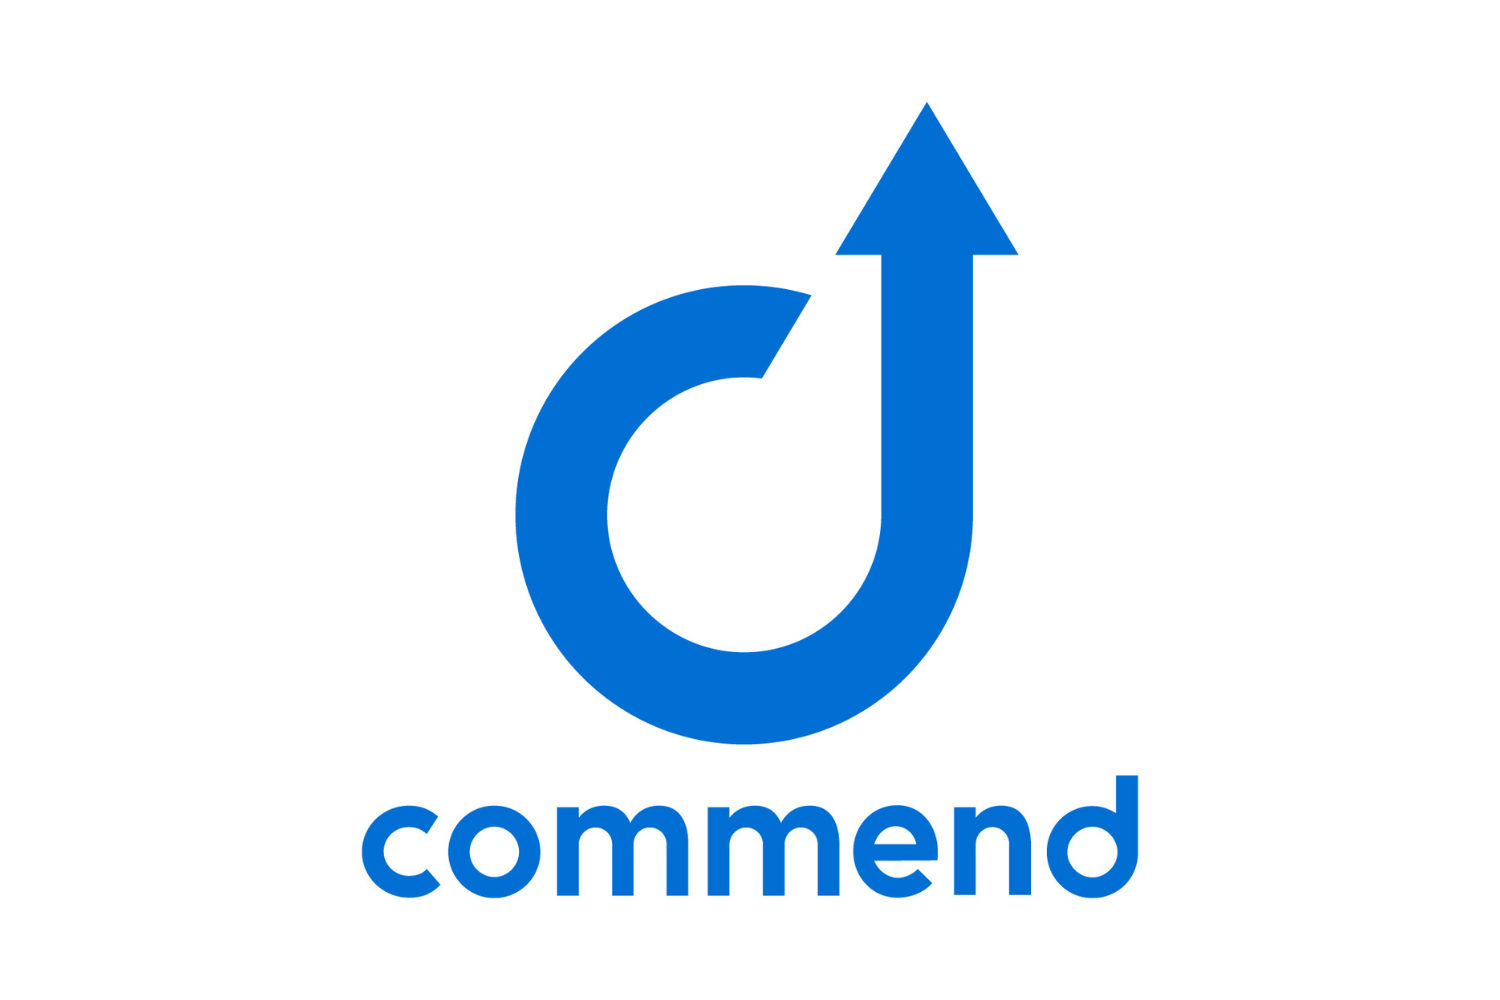 Commend UK Limited